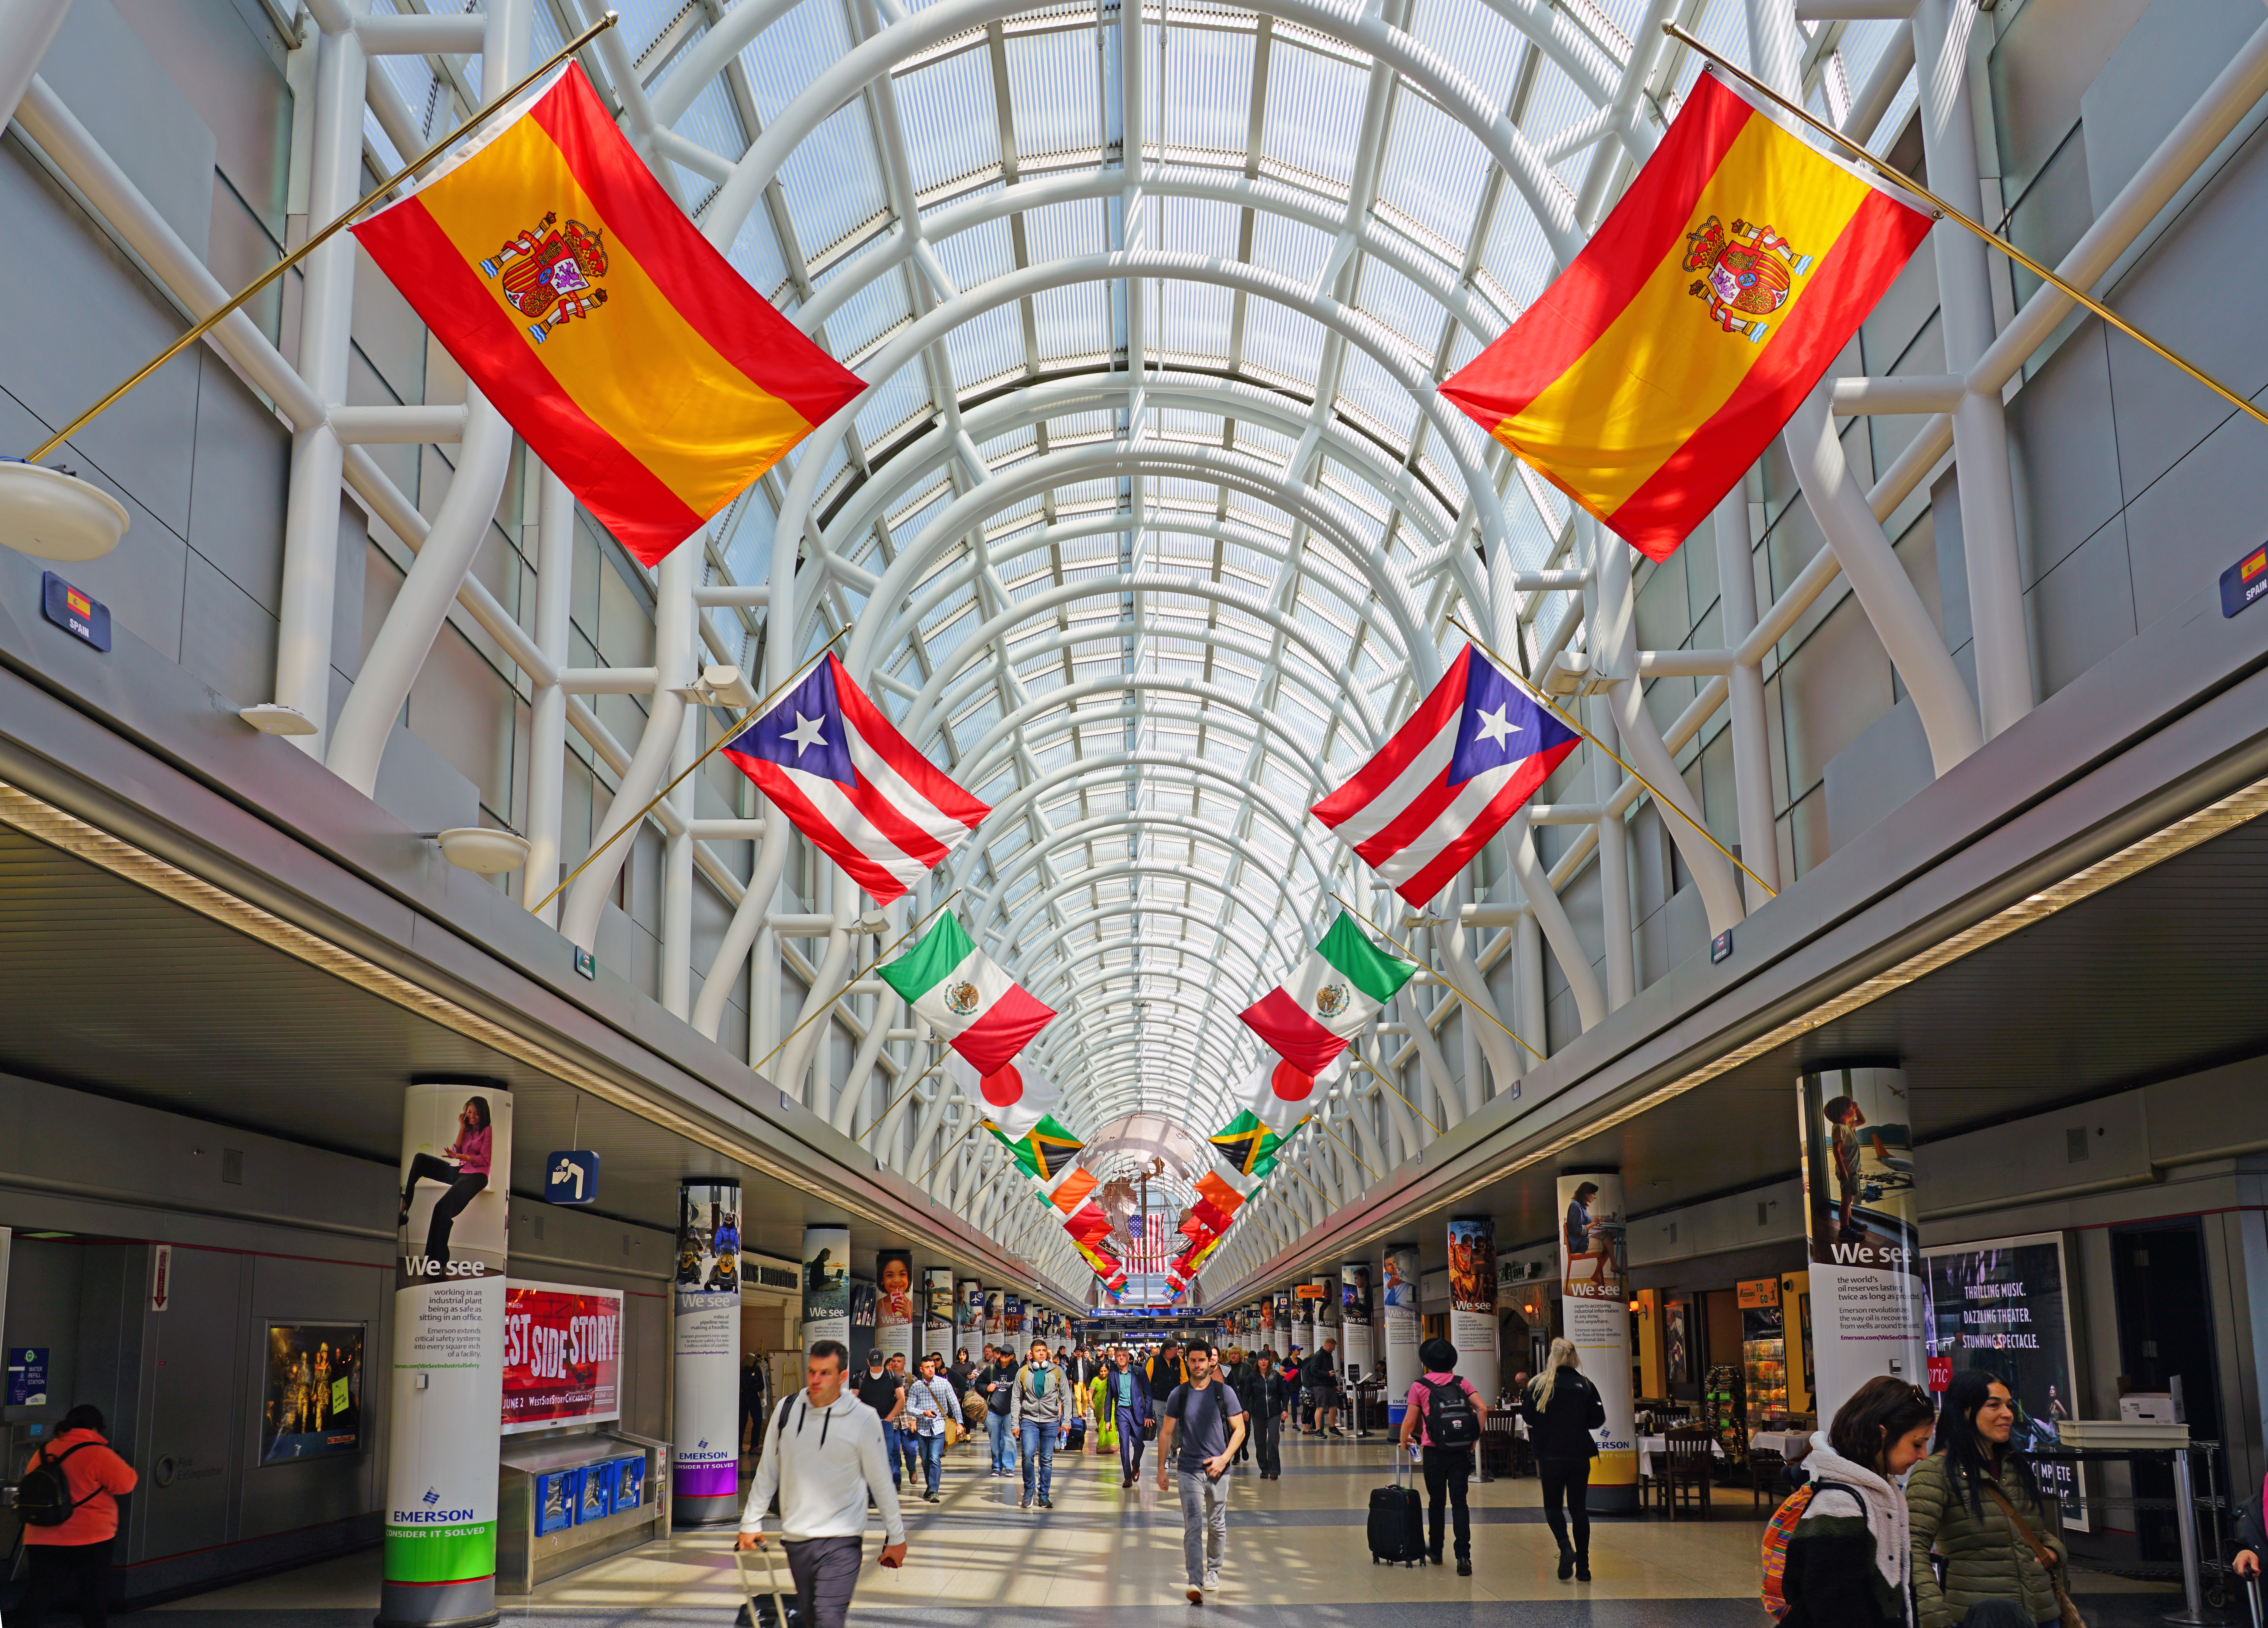 A glass-dome massive hallway at an airport with gates in the distances. International flags decorate columns up top near the skylight. 